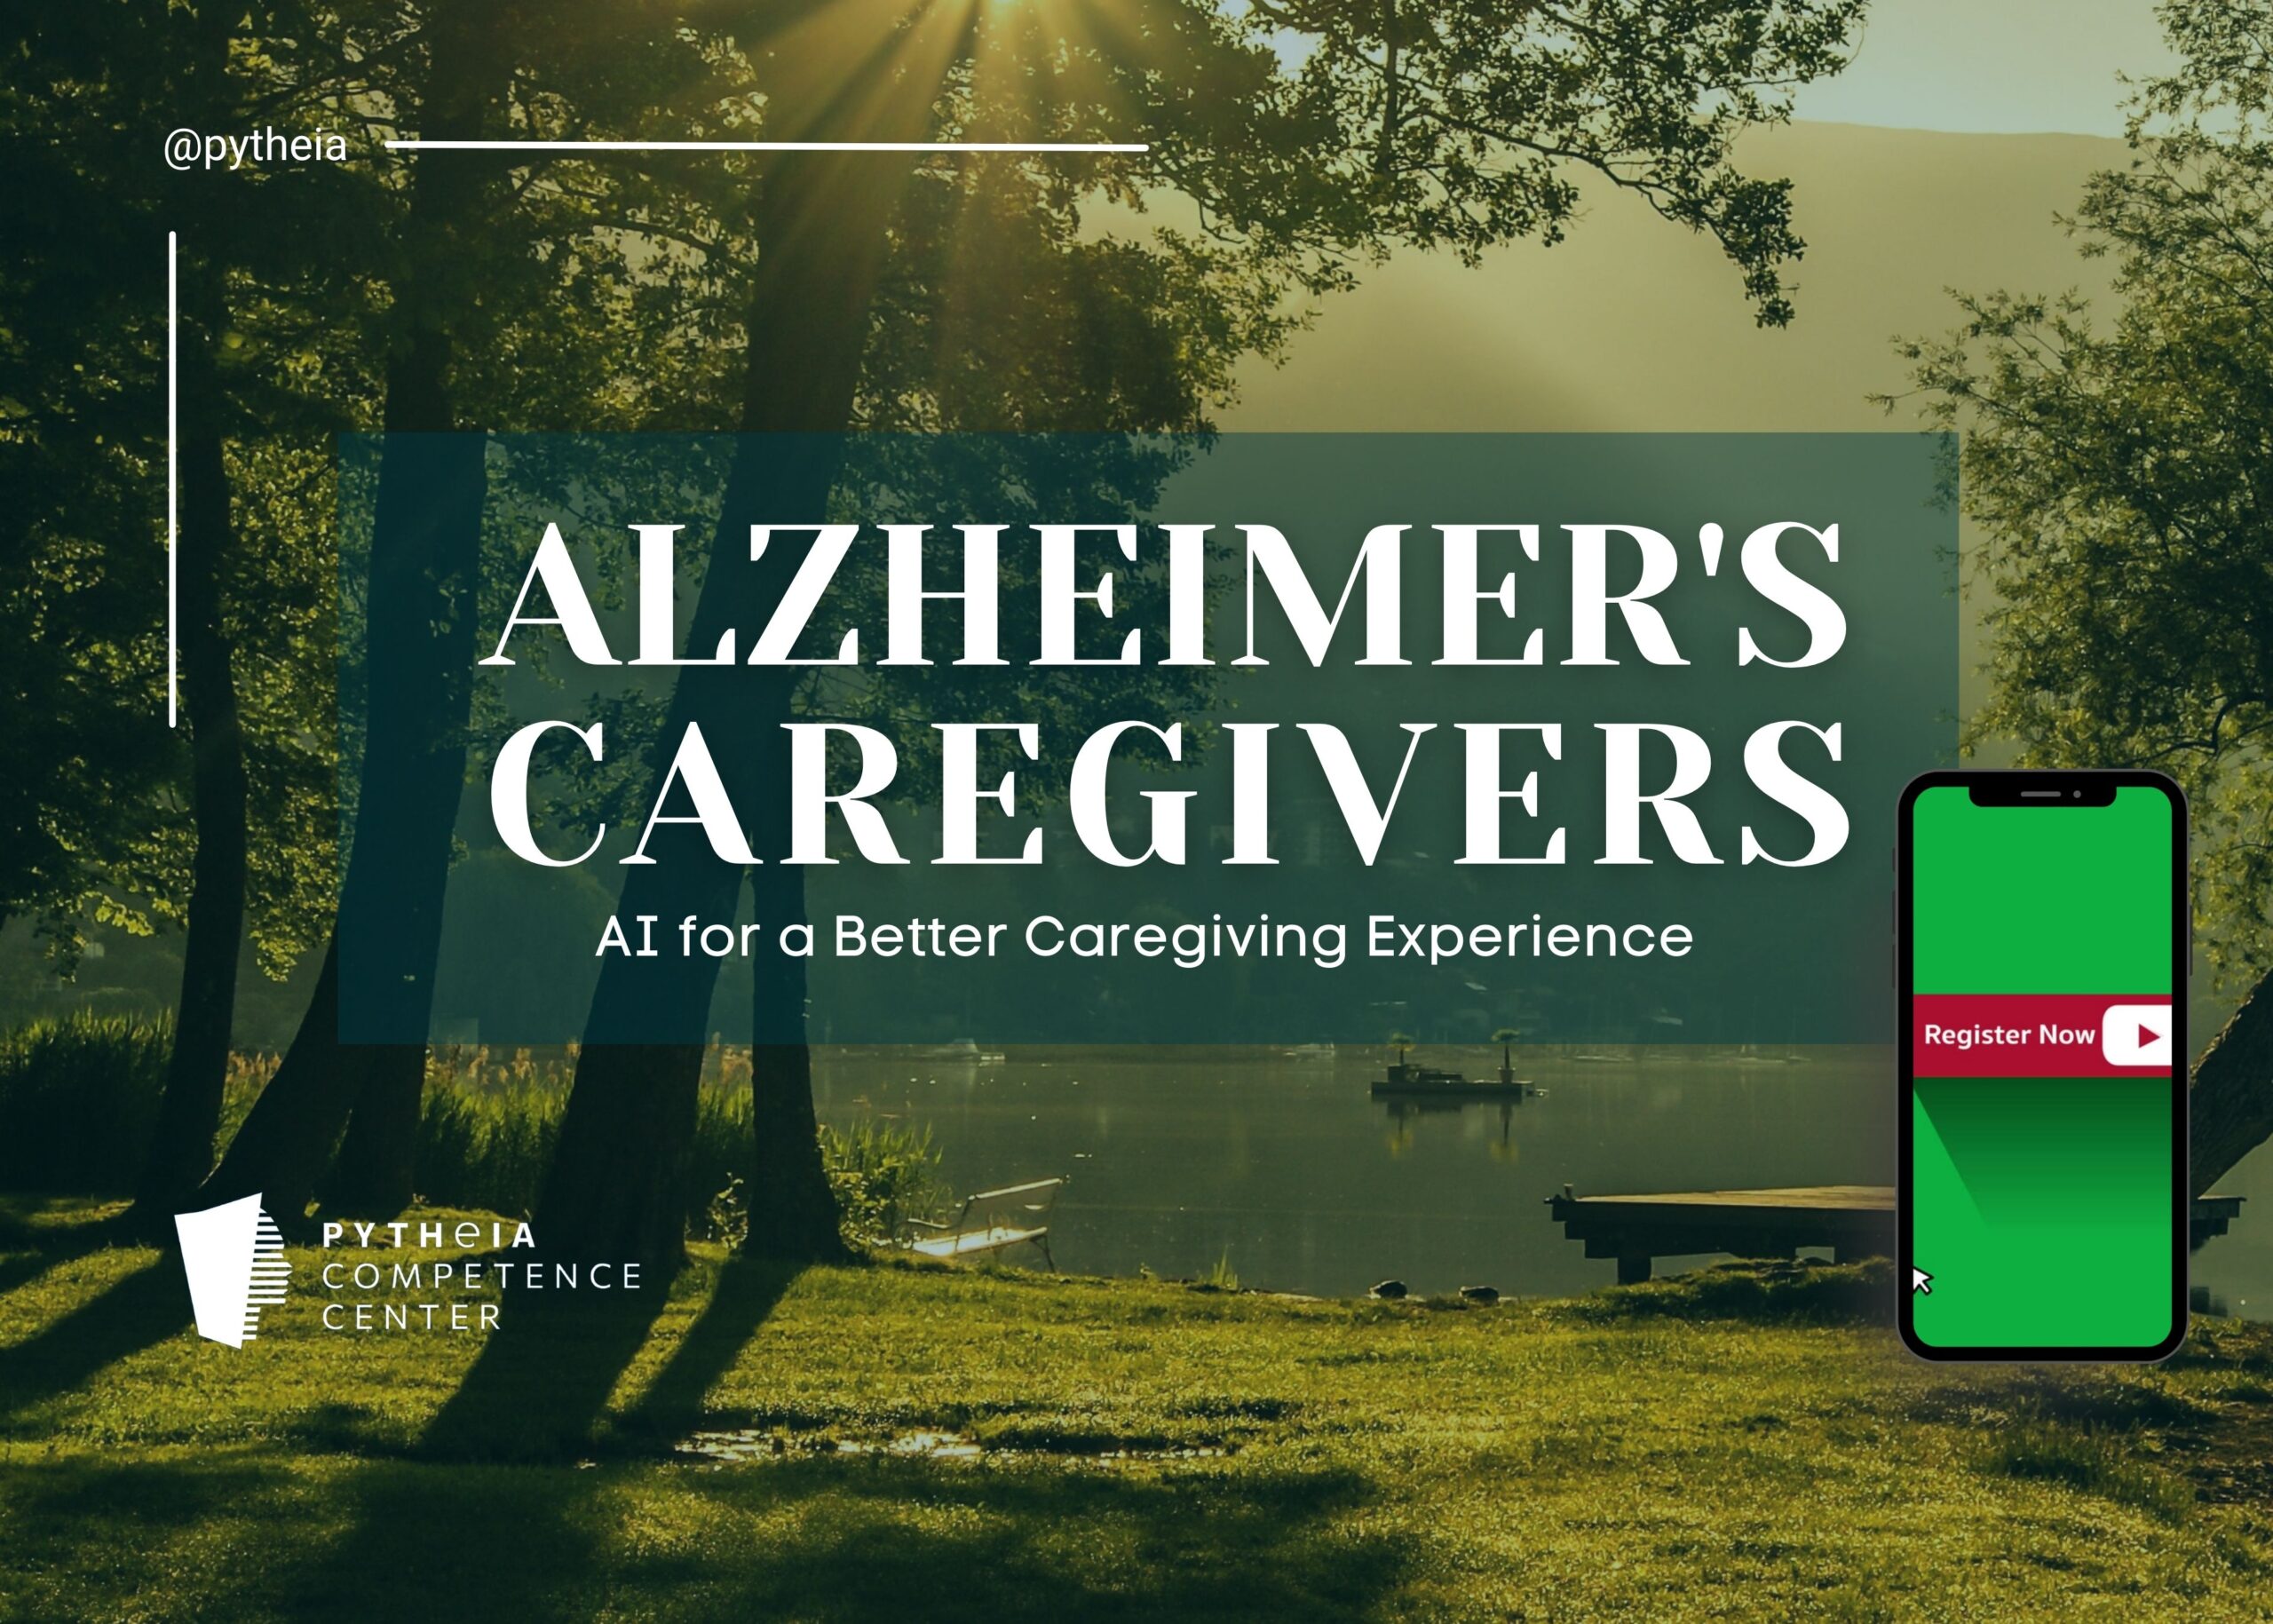 AI Applications and Technology for Alzheimer’s Caregivers: The Ultimate Skills Upgrade